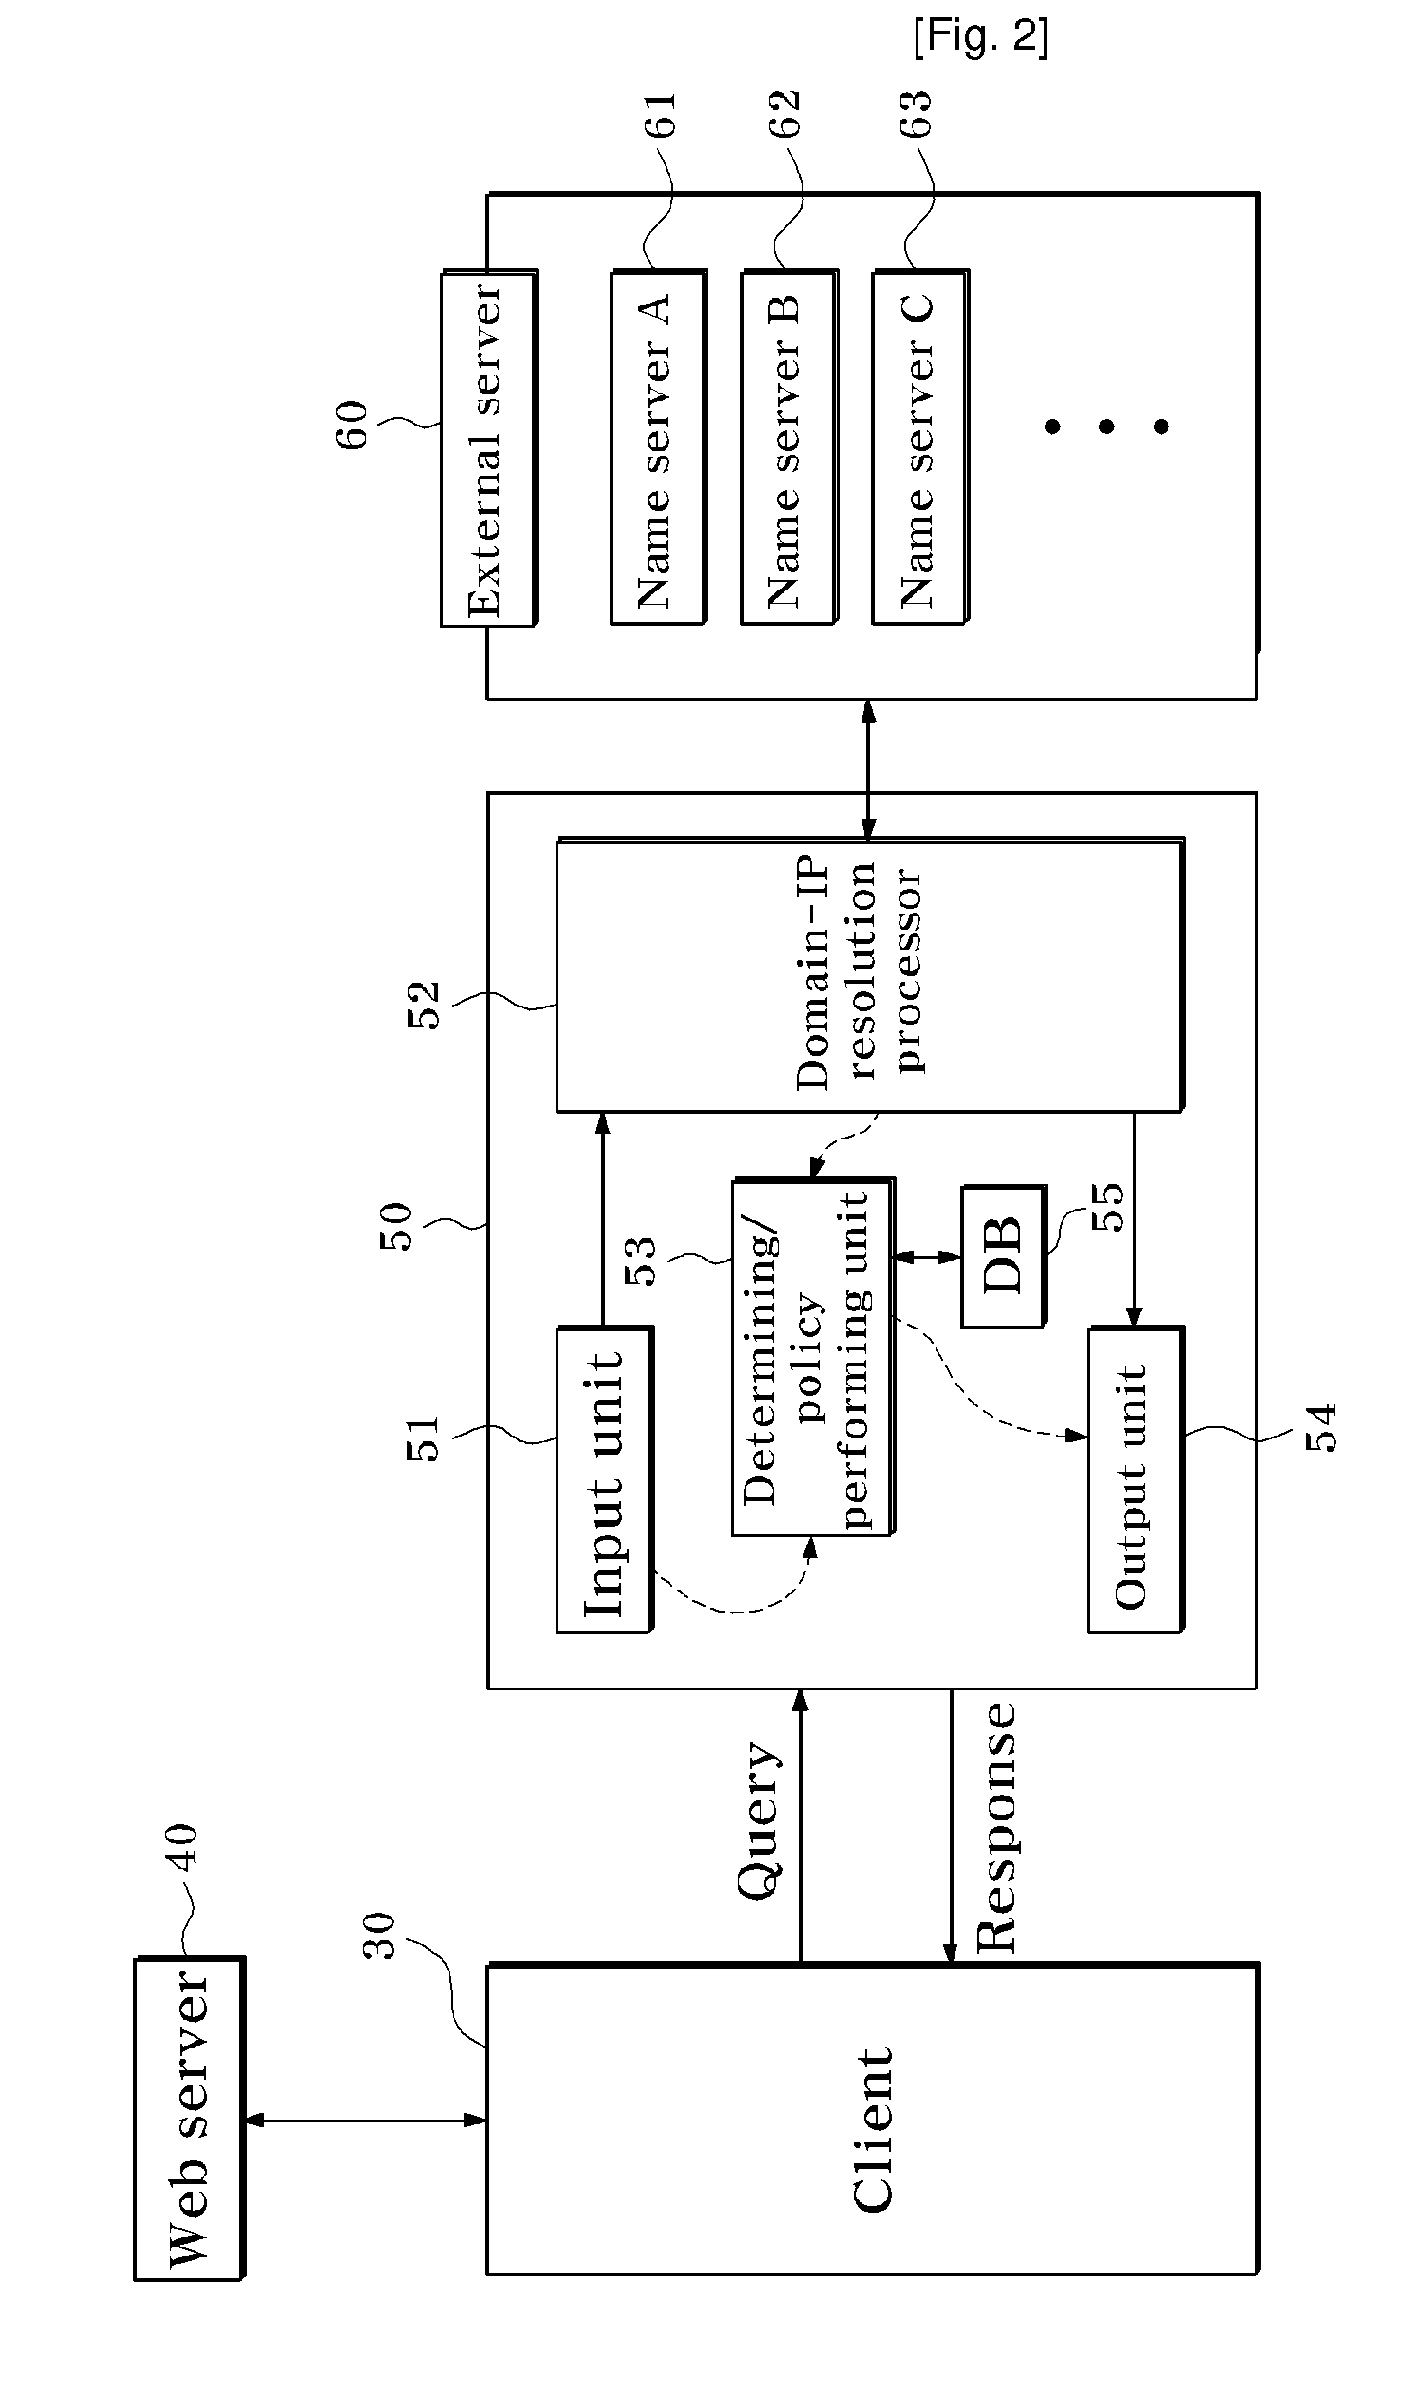 Local Domain Name Service System and Method for Providing Service Using Domain Name Service System